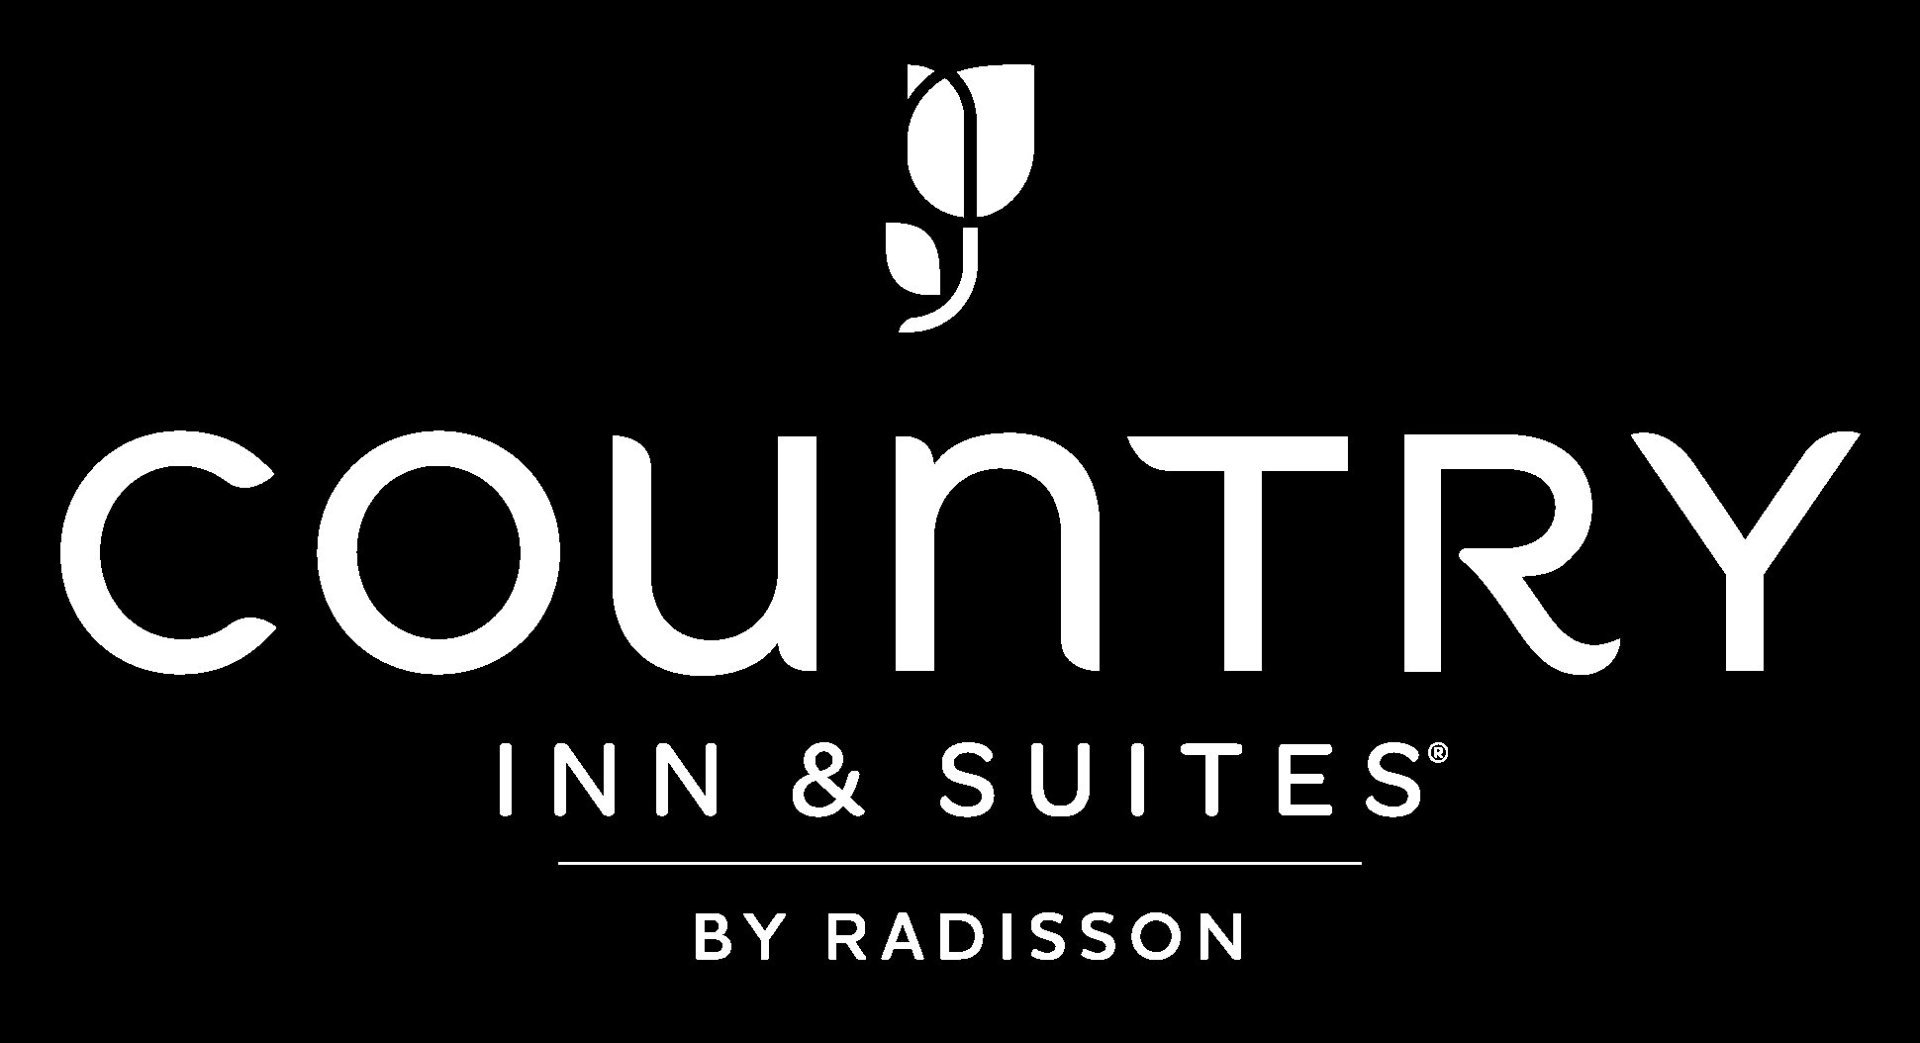 Country Inn and Suites black logo